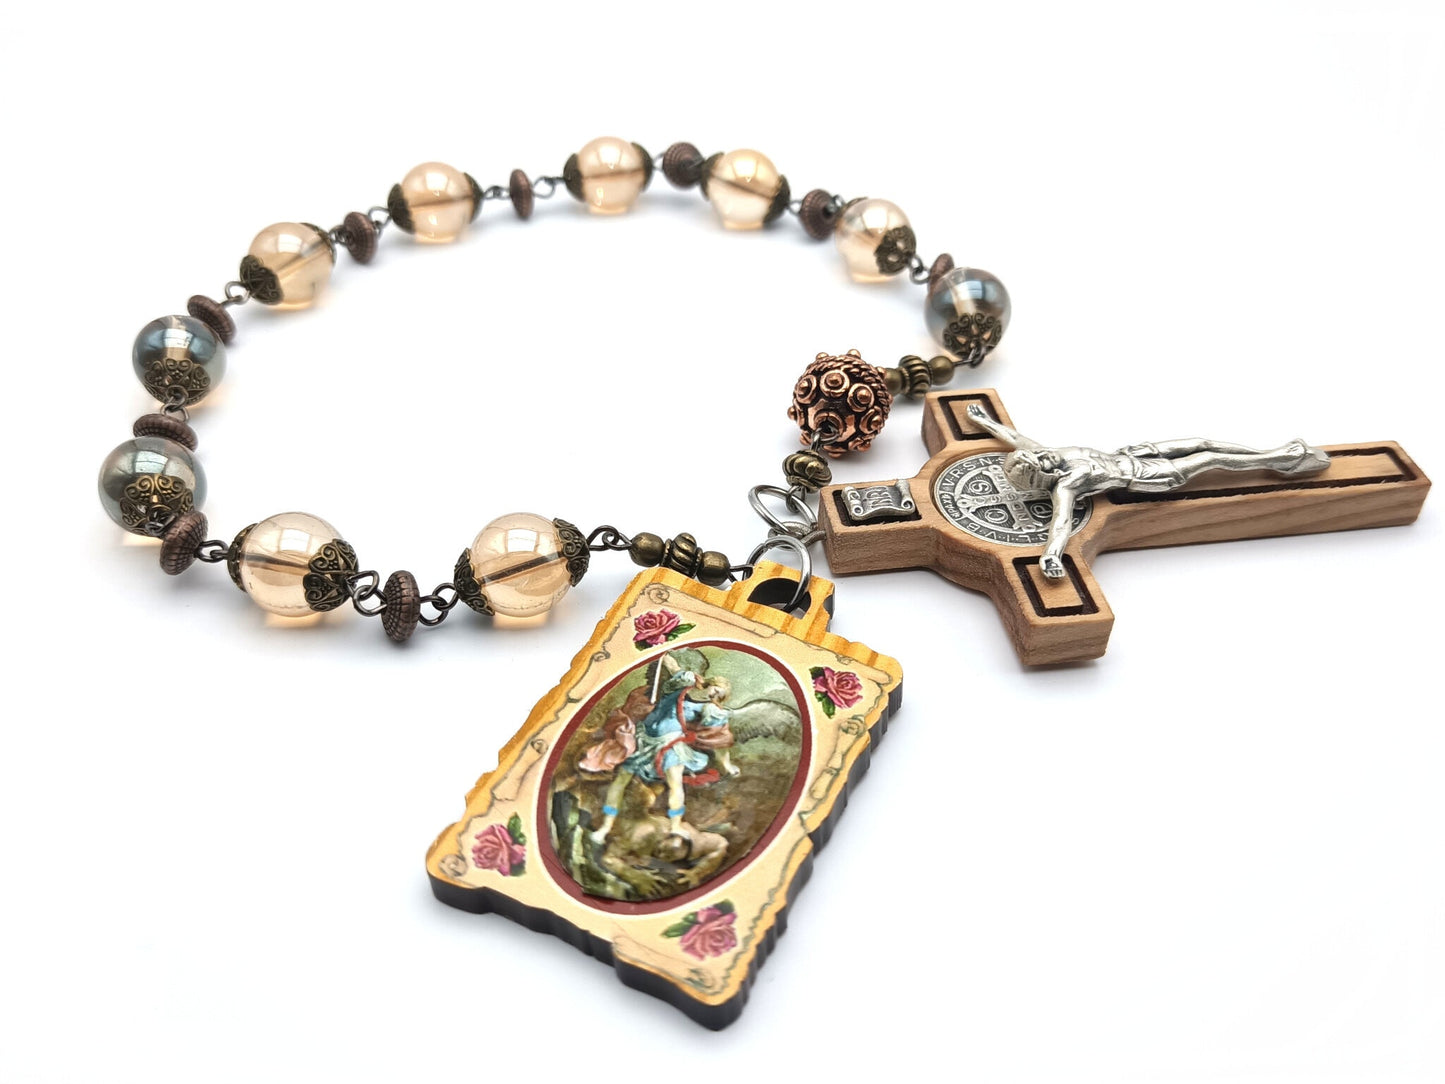 Saint Michael unique rosary beads single decade or tenner with pale gold glass beads, bronze bead caps, copper pater bead and silver and wooden crucifix and Saint Michael wooden picture medal.